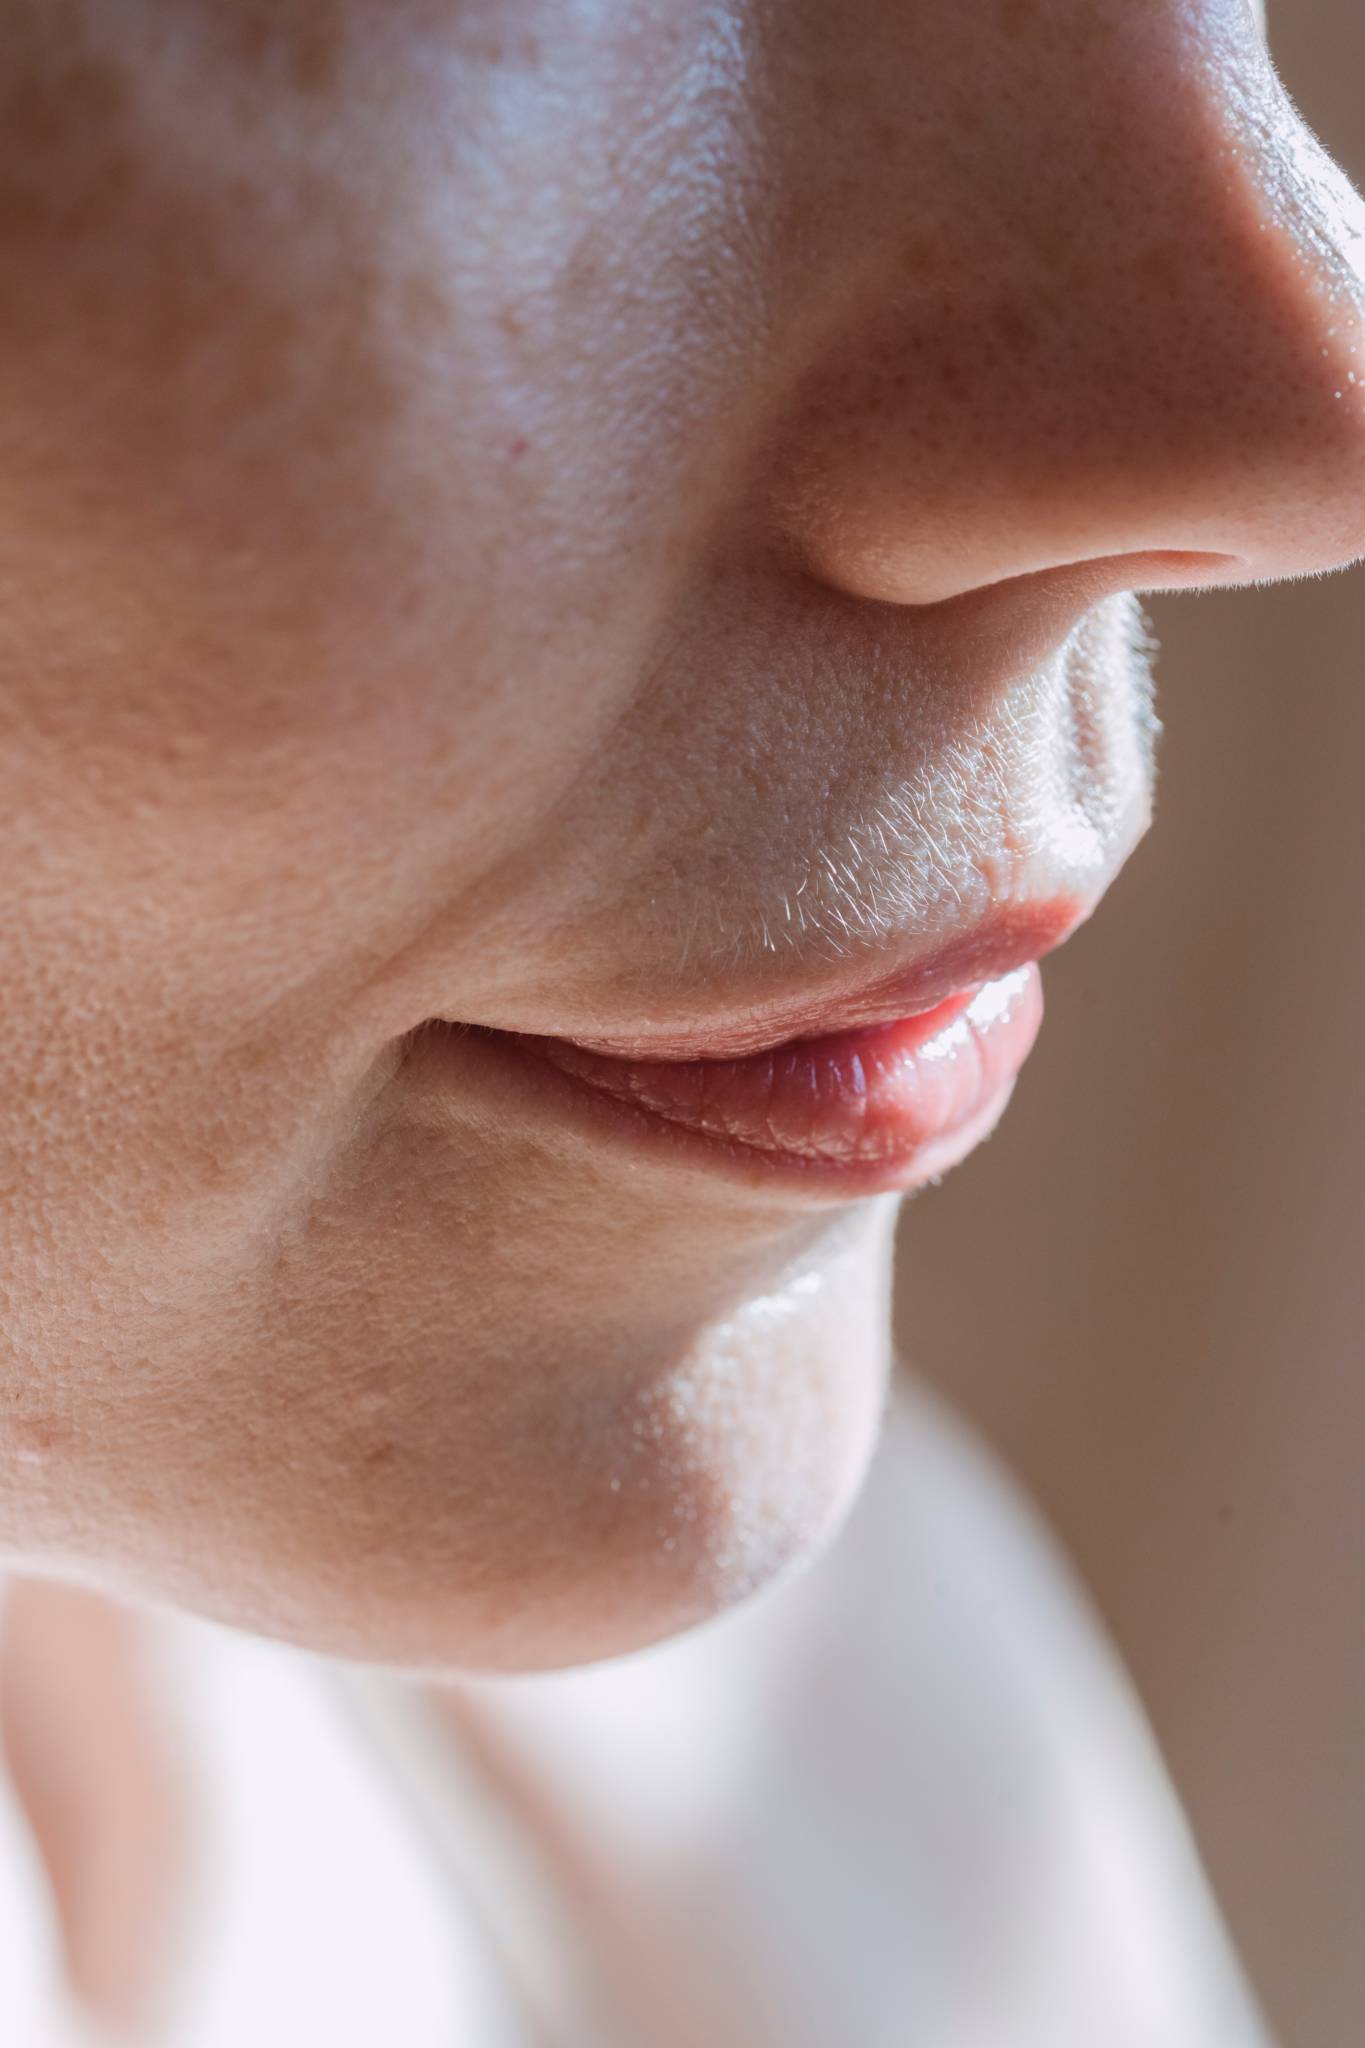 woman's chin, lips and nose in frame